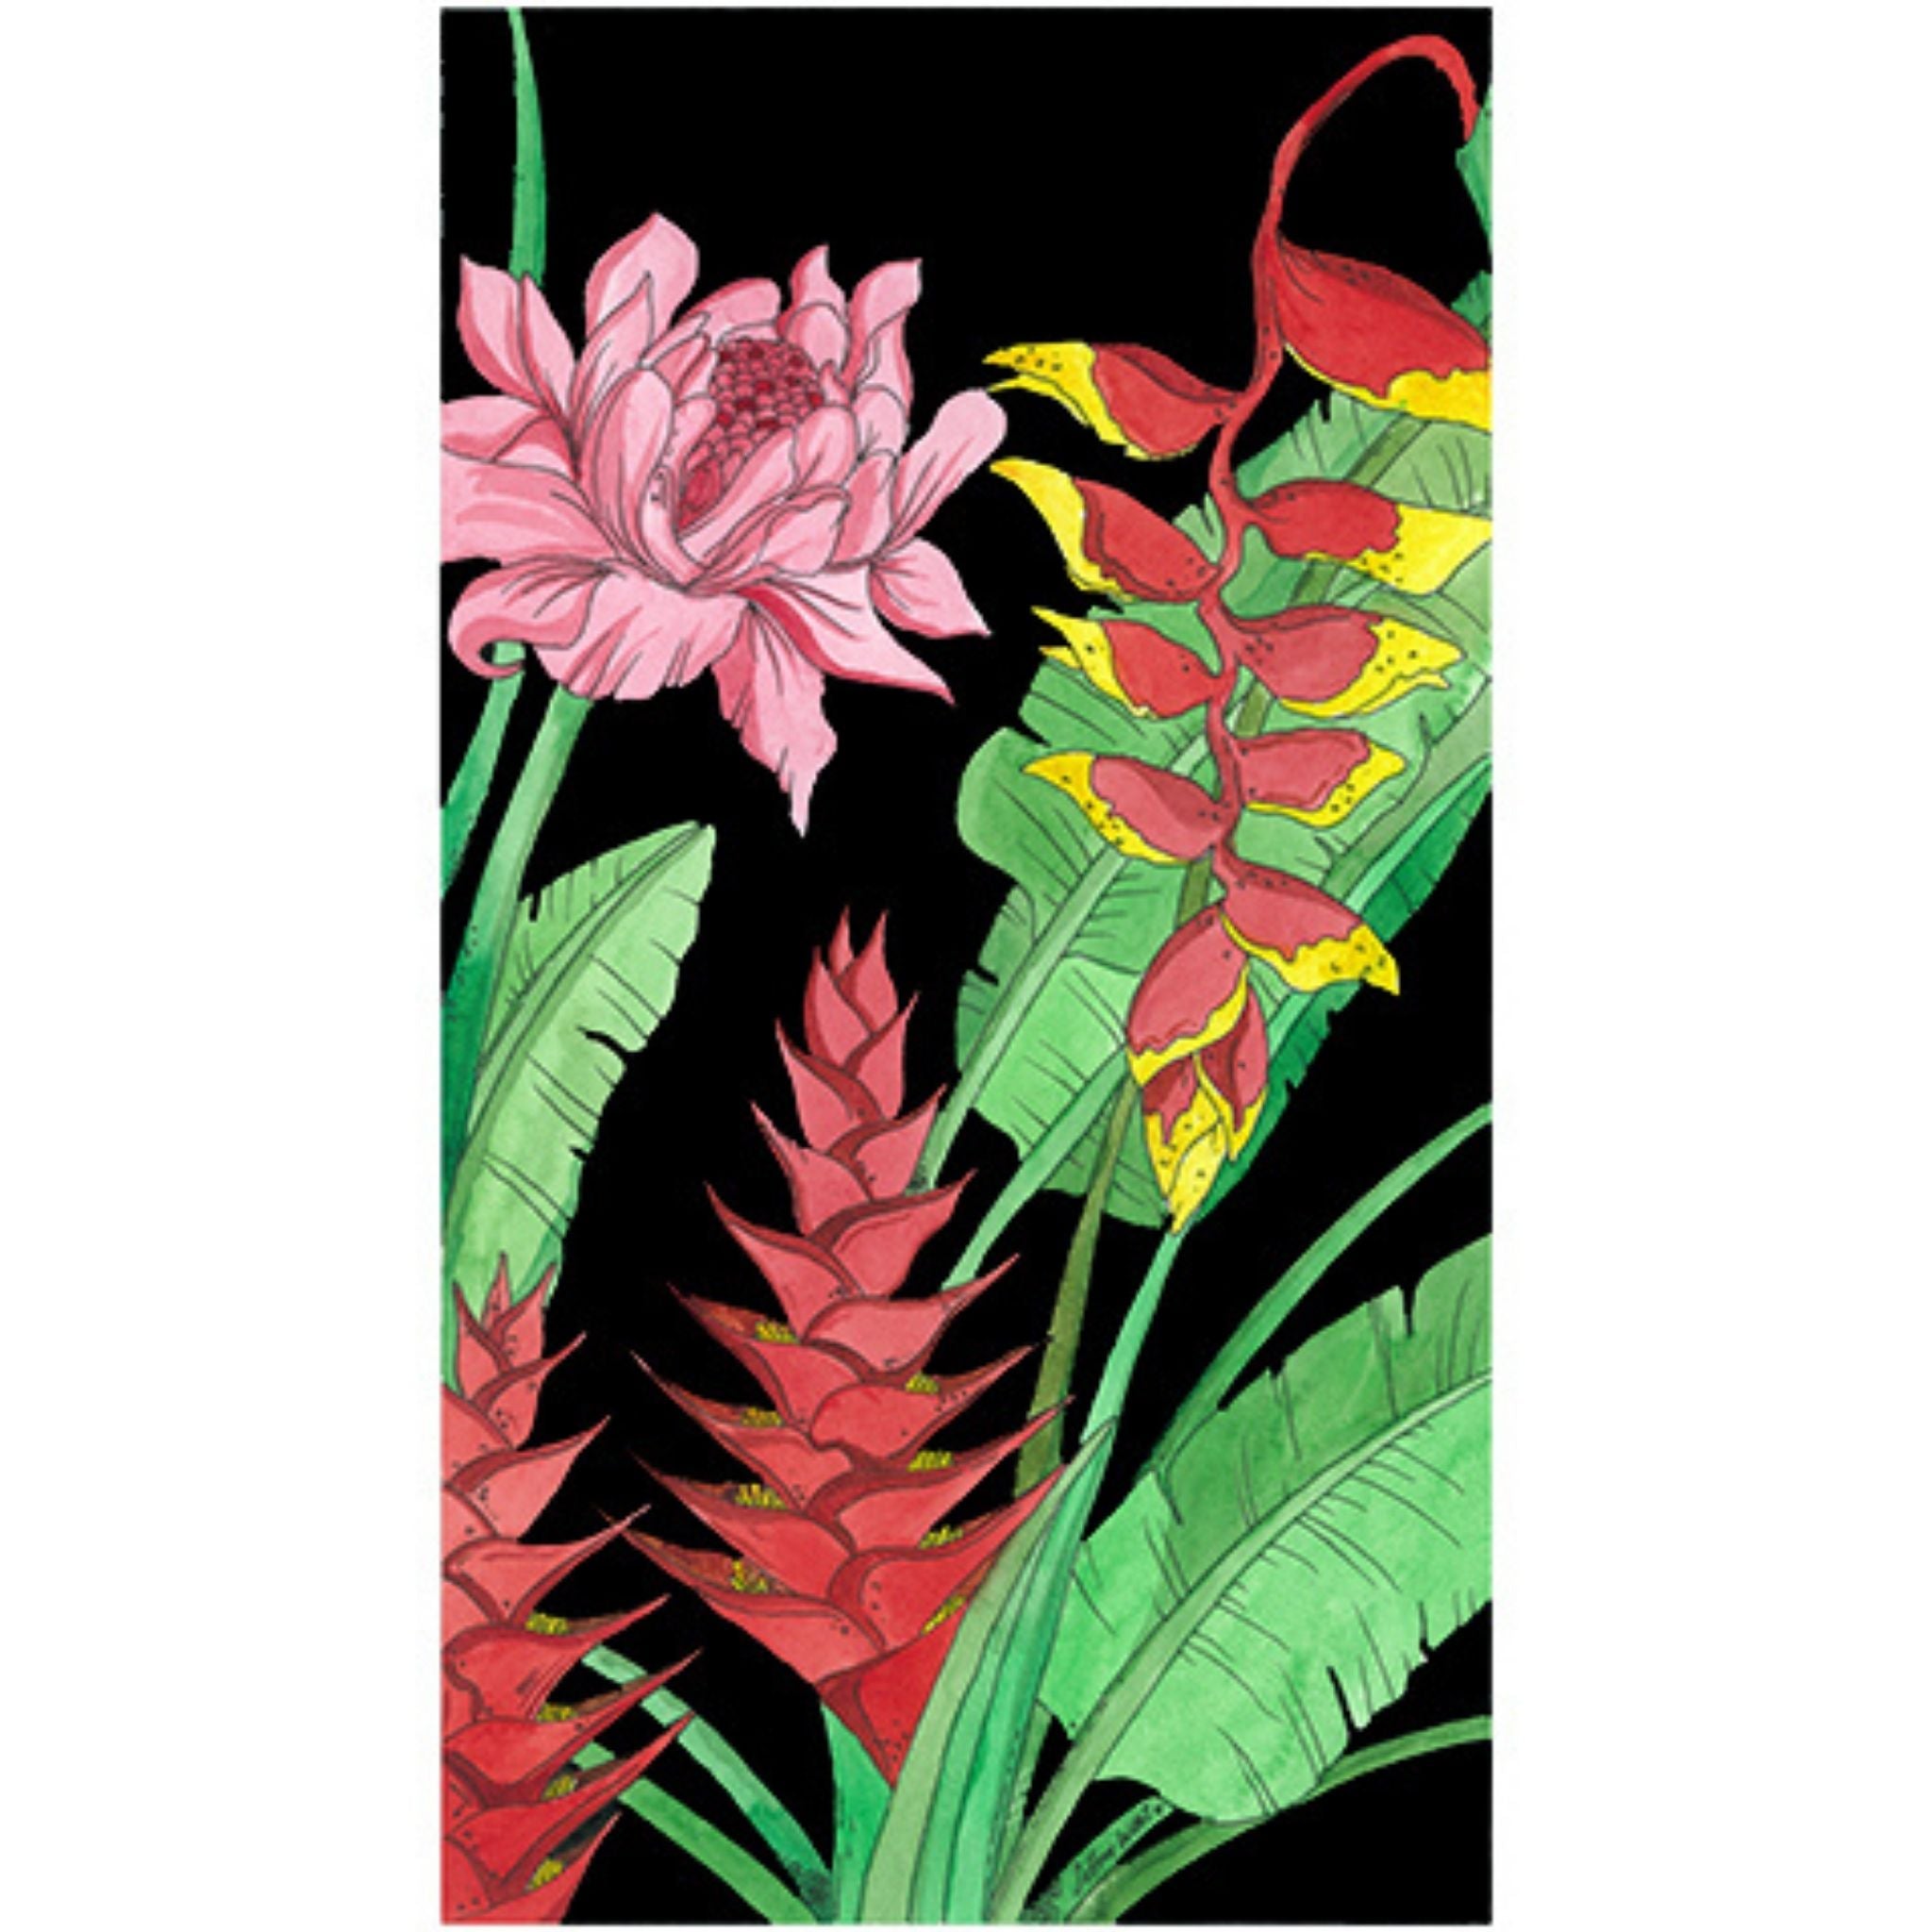 Tropical Flowers (Size: A3)